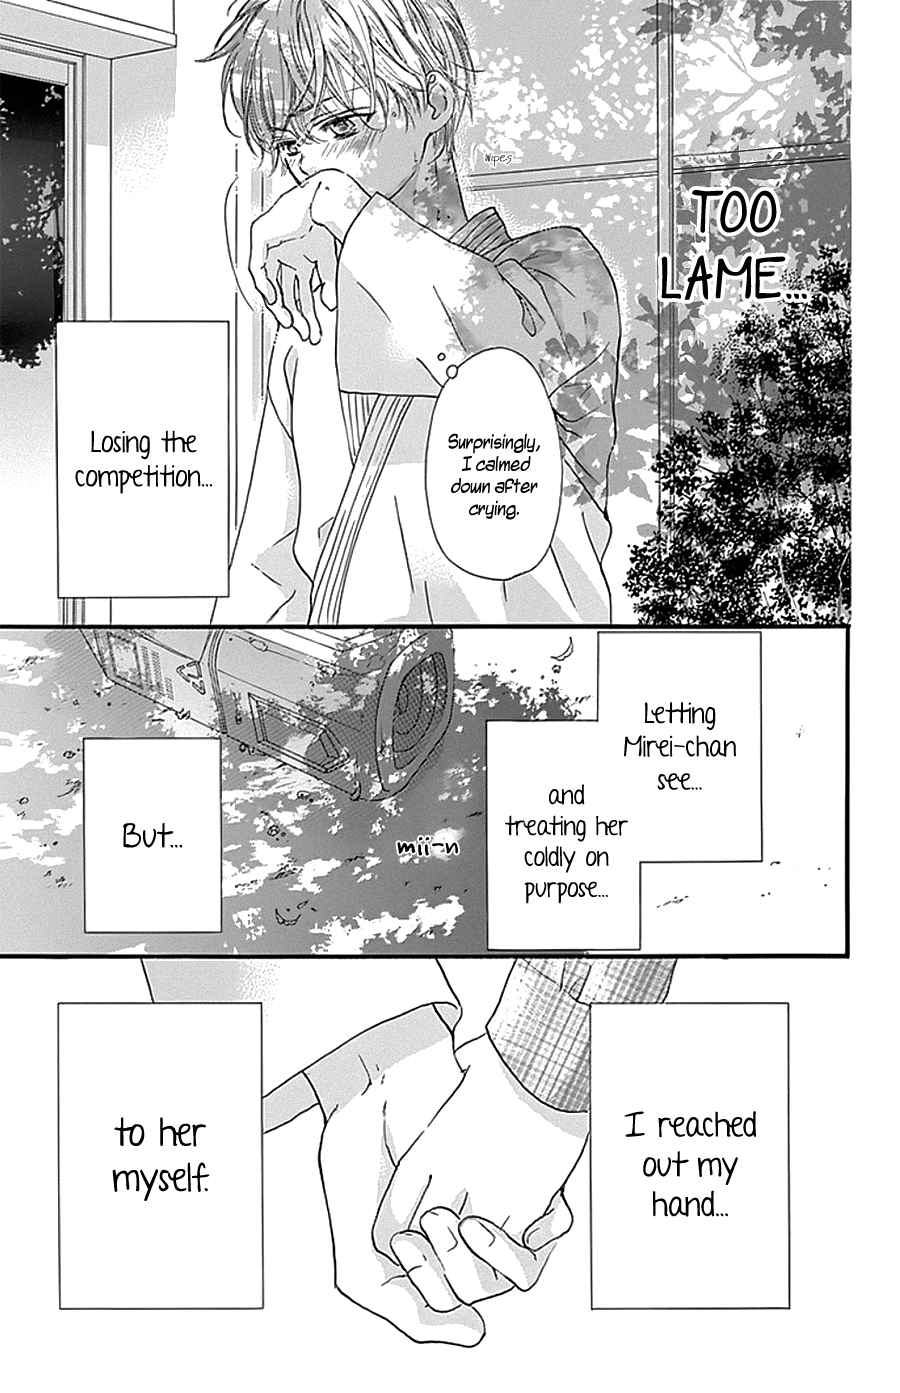 I Love You Baby Vol. 2 Ch. 13